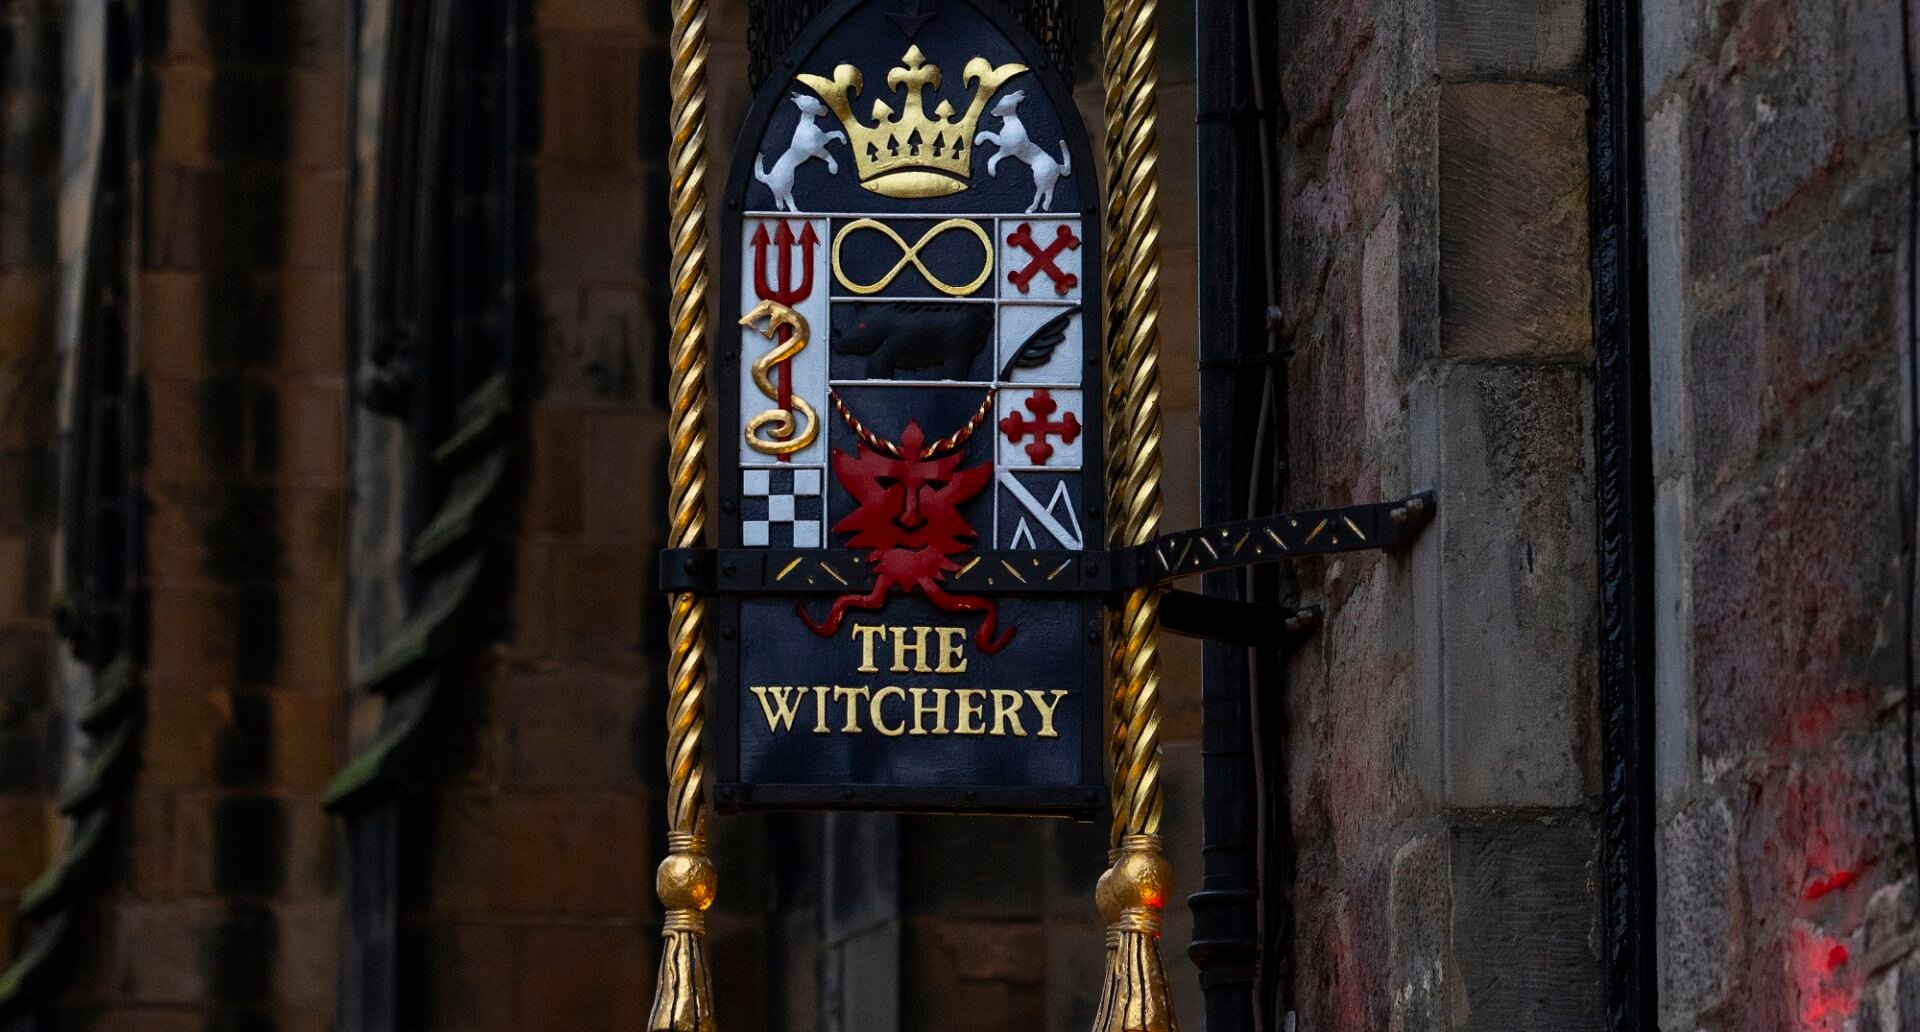 The Witchery Sign